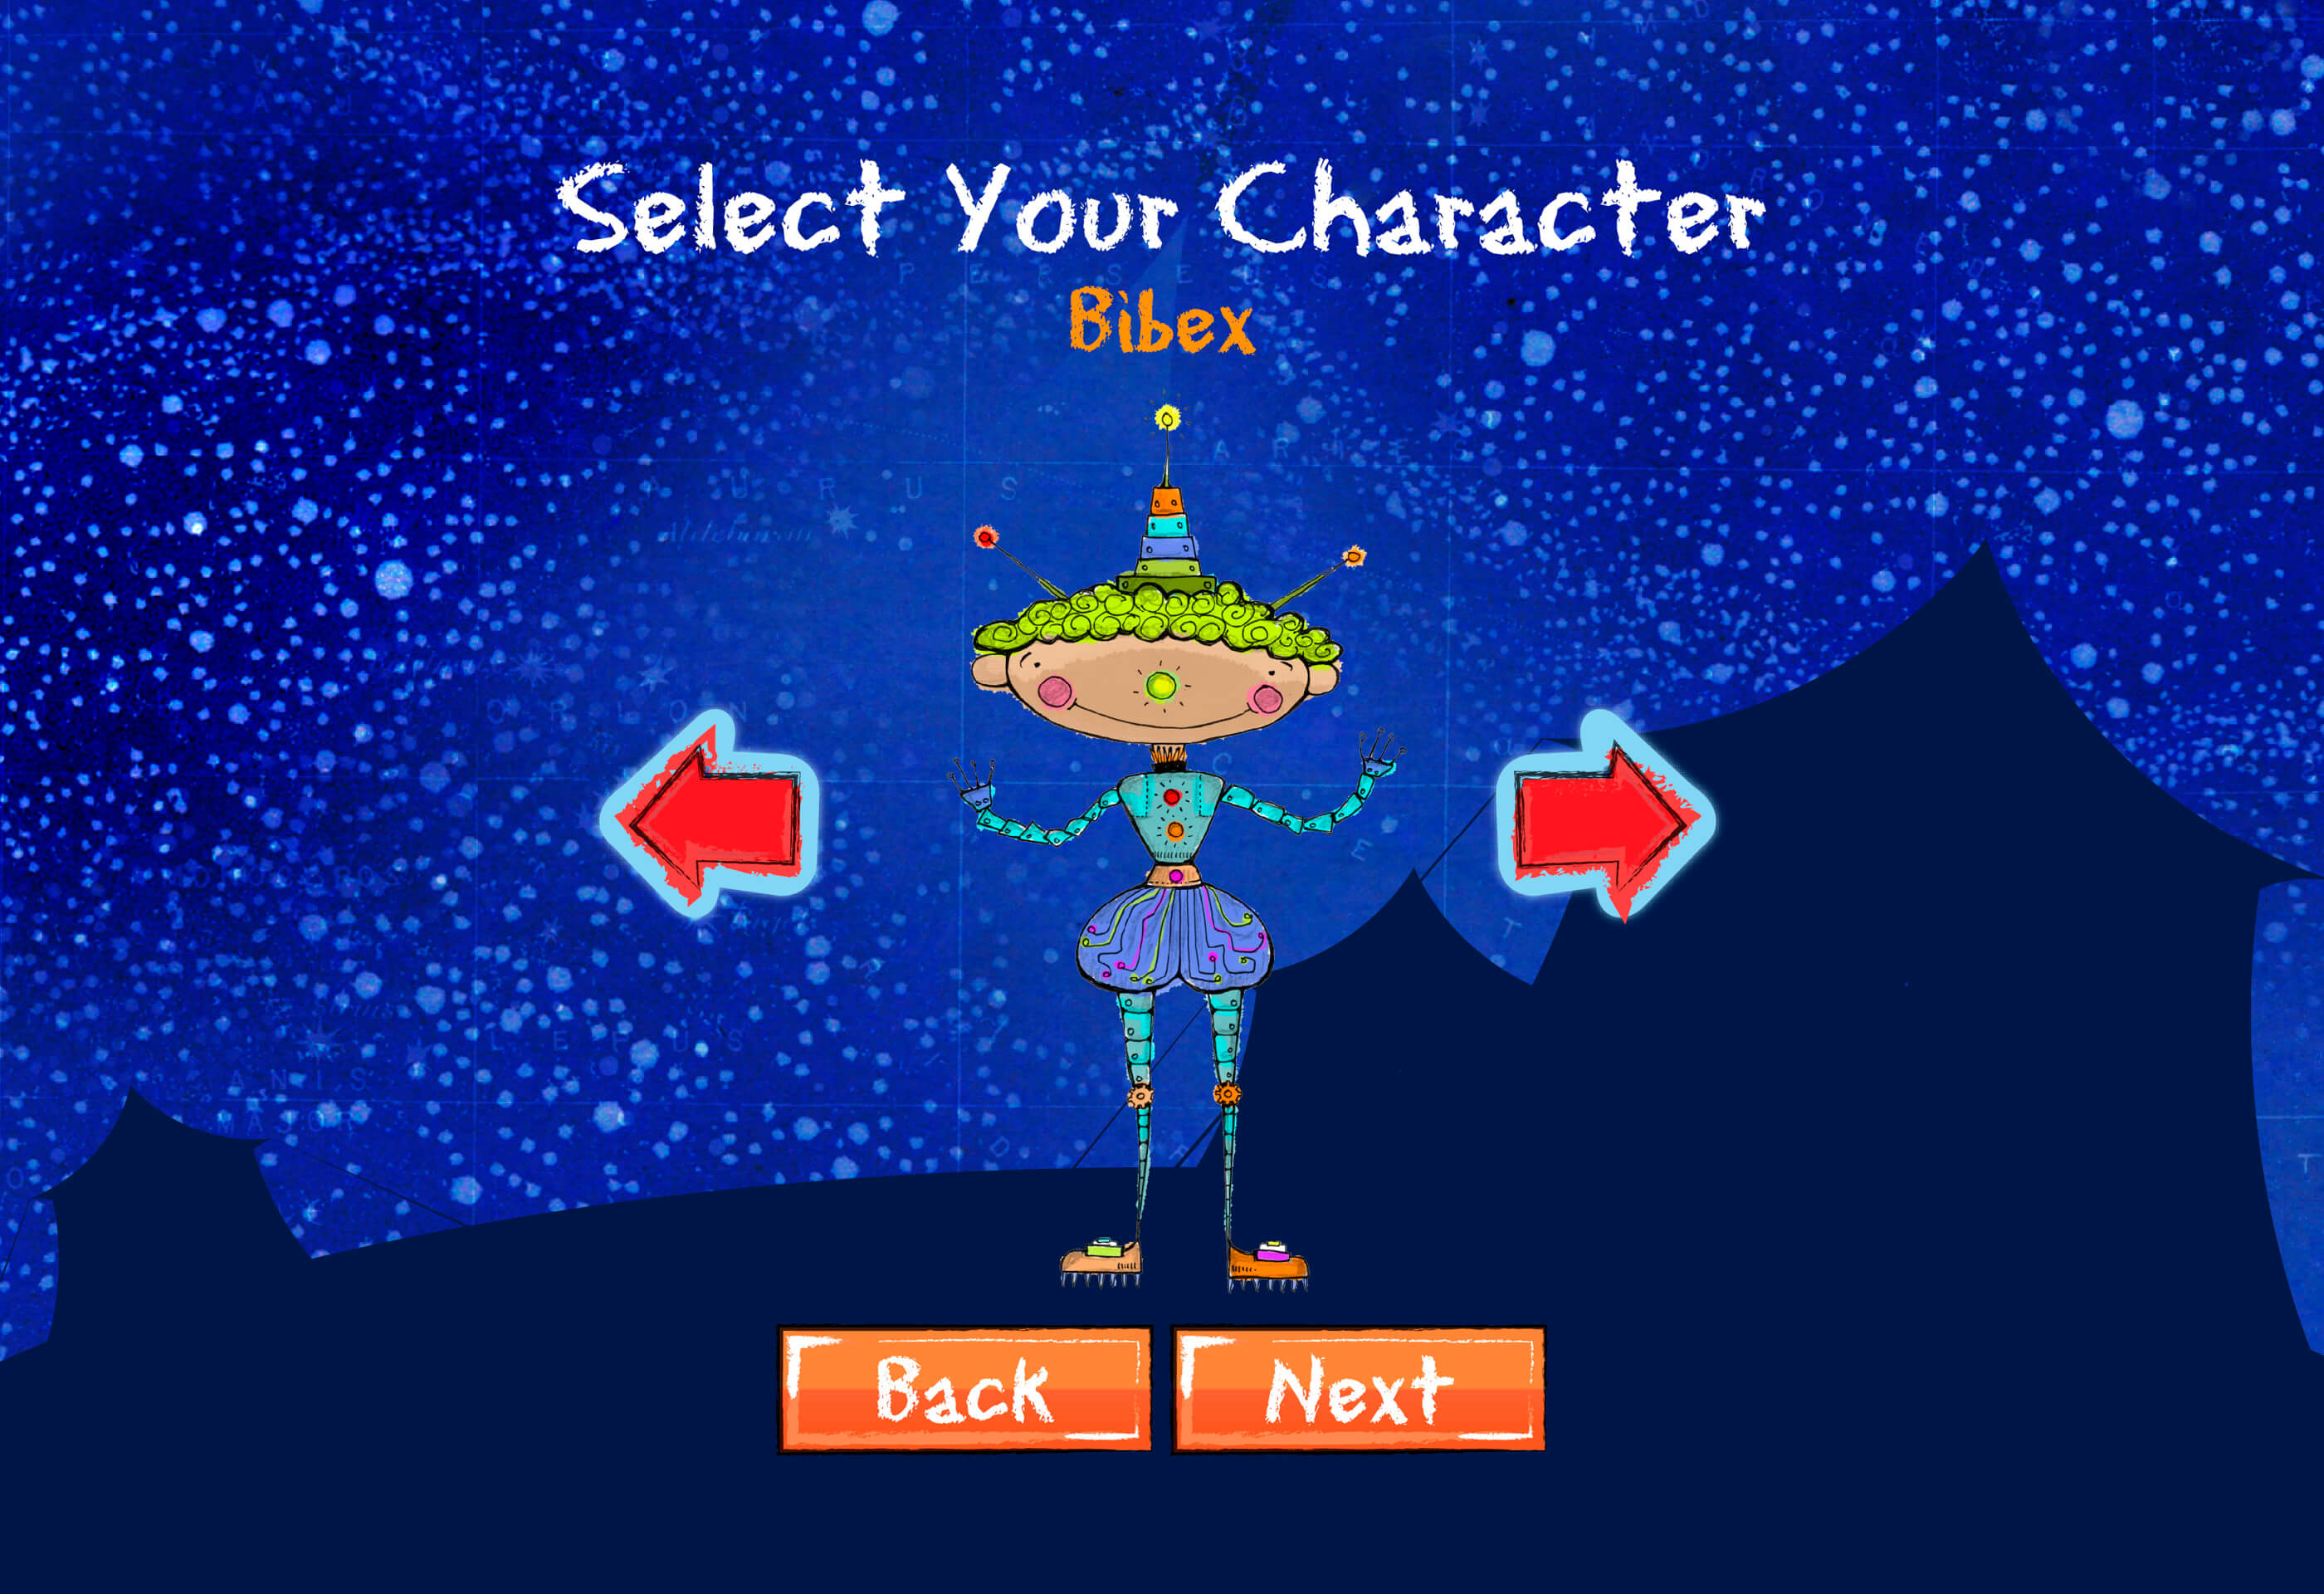 'Select your character' screen within the game, featuring Bibex, an alien with green curly hair and baby blue tights